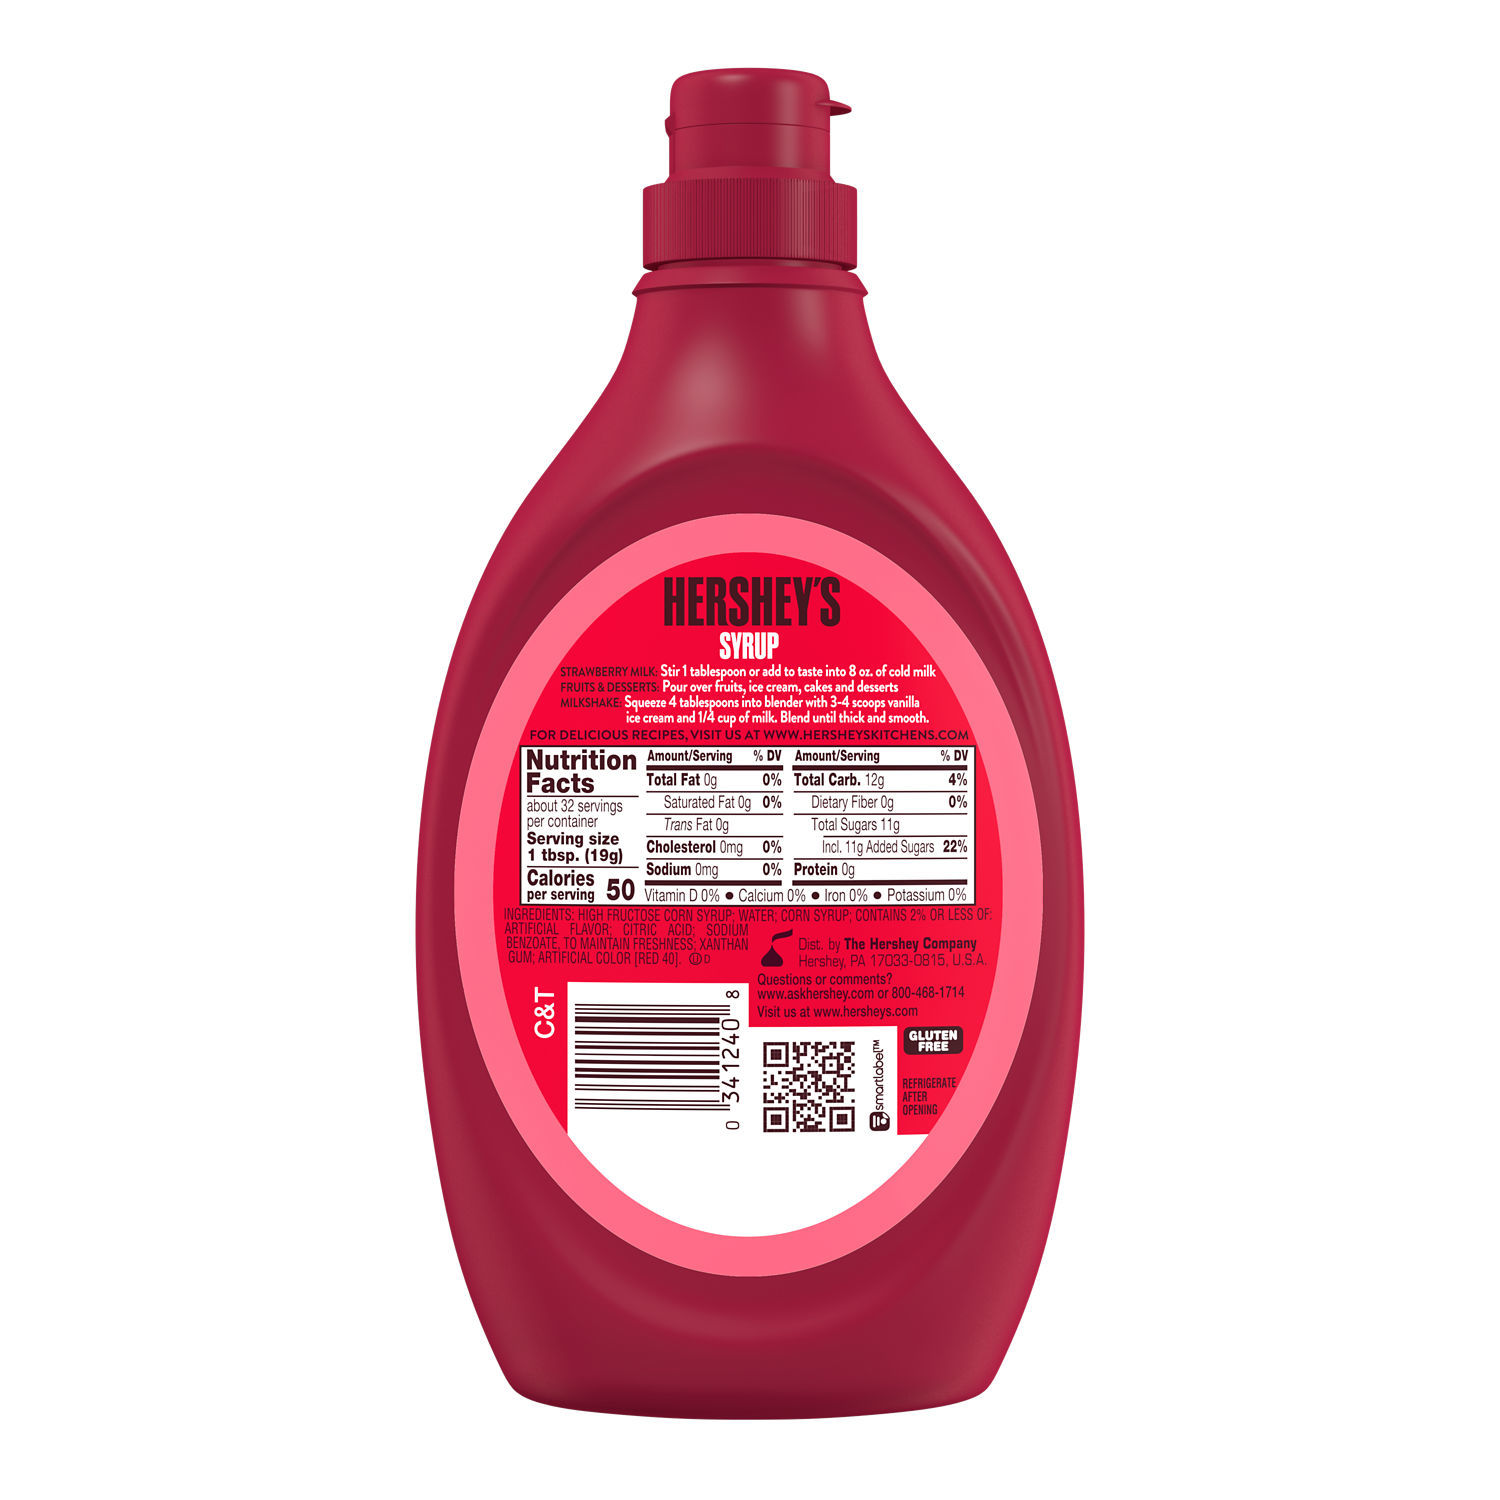 Hershey's Strawberry Flavored Syrup, Bottle 22 oz - image 2 of 5